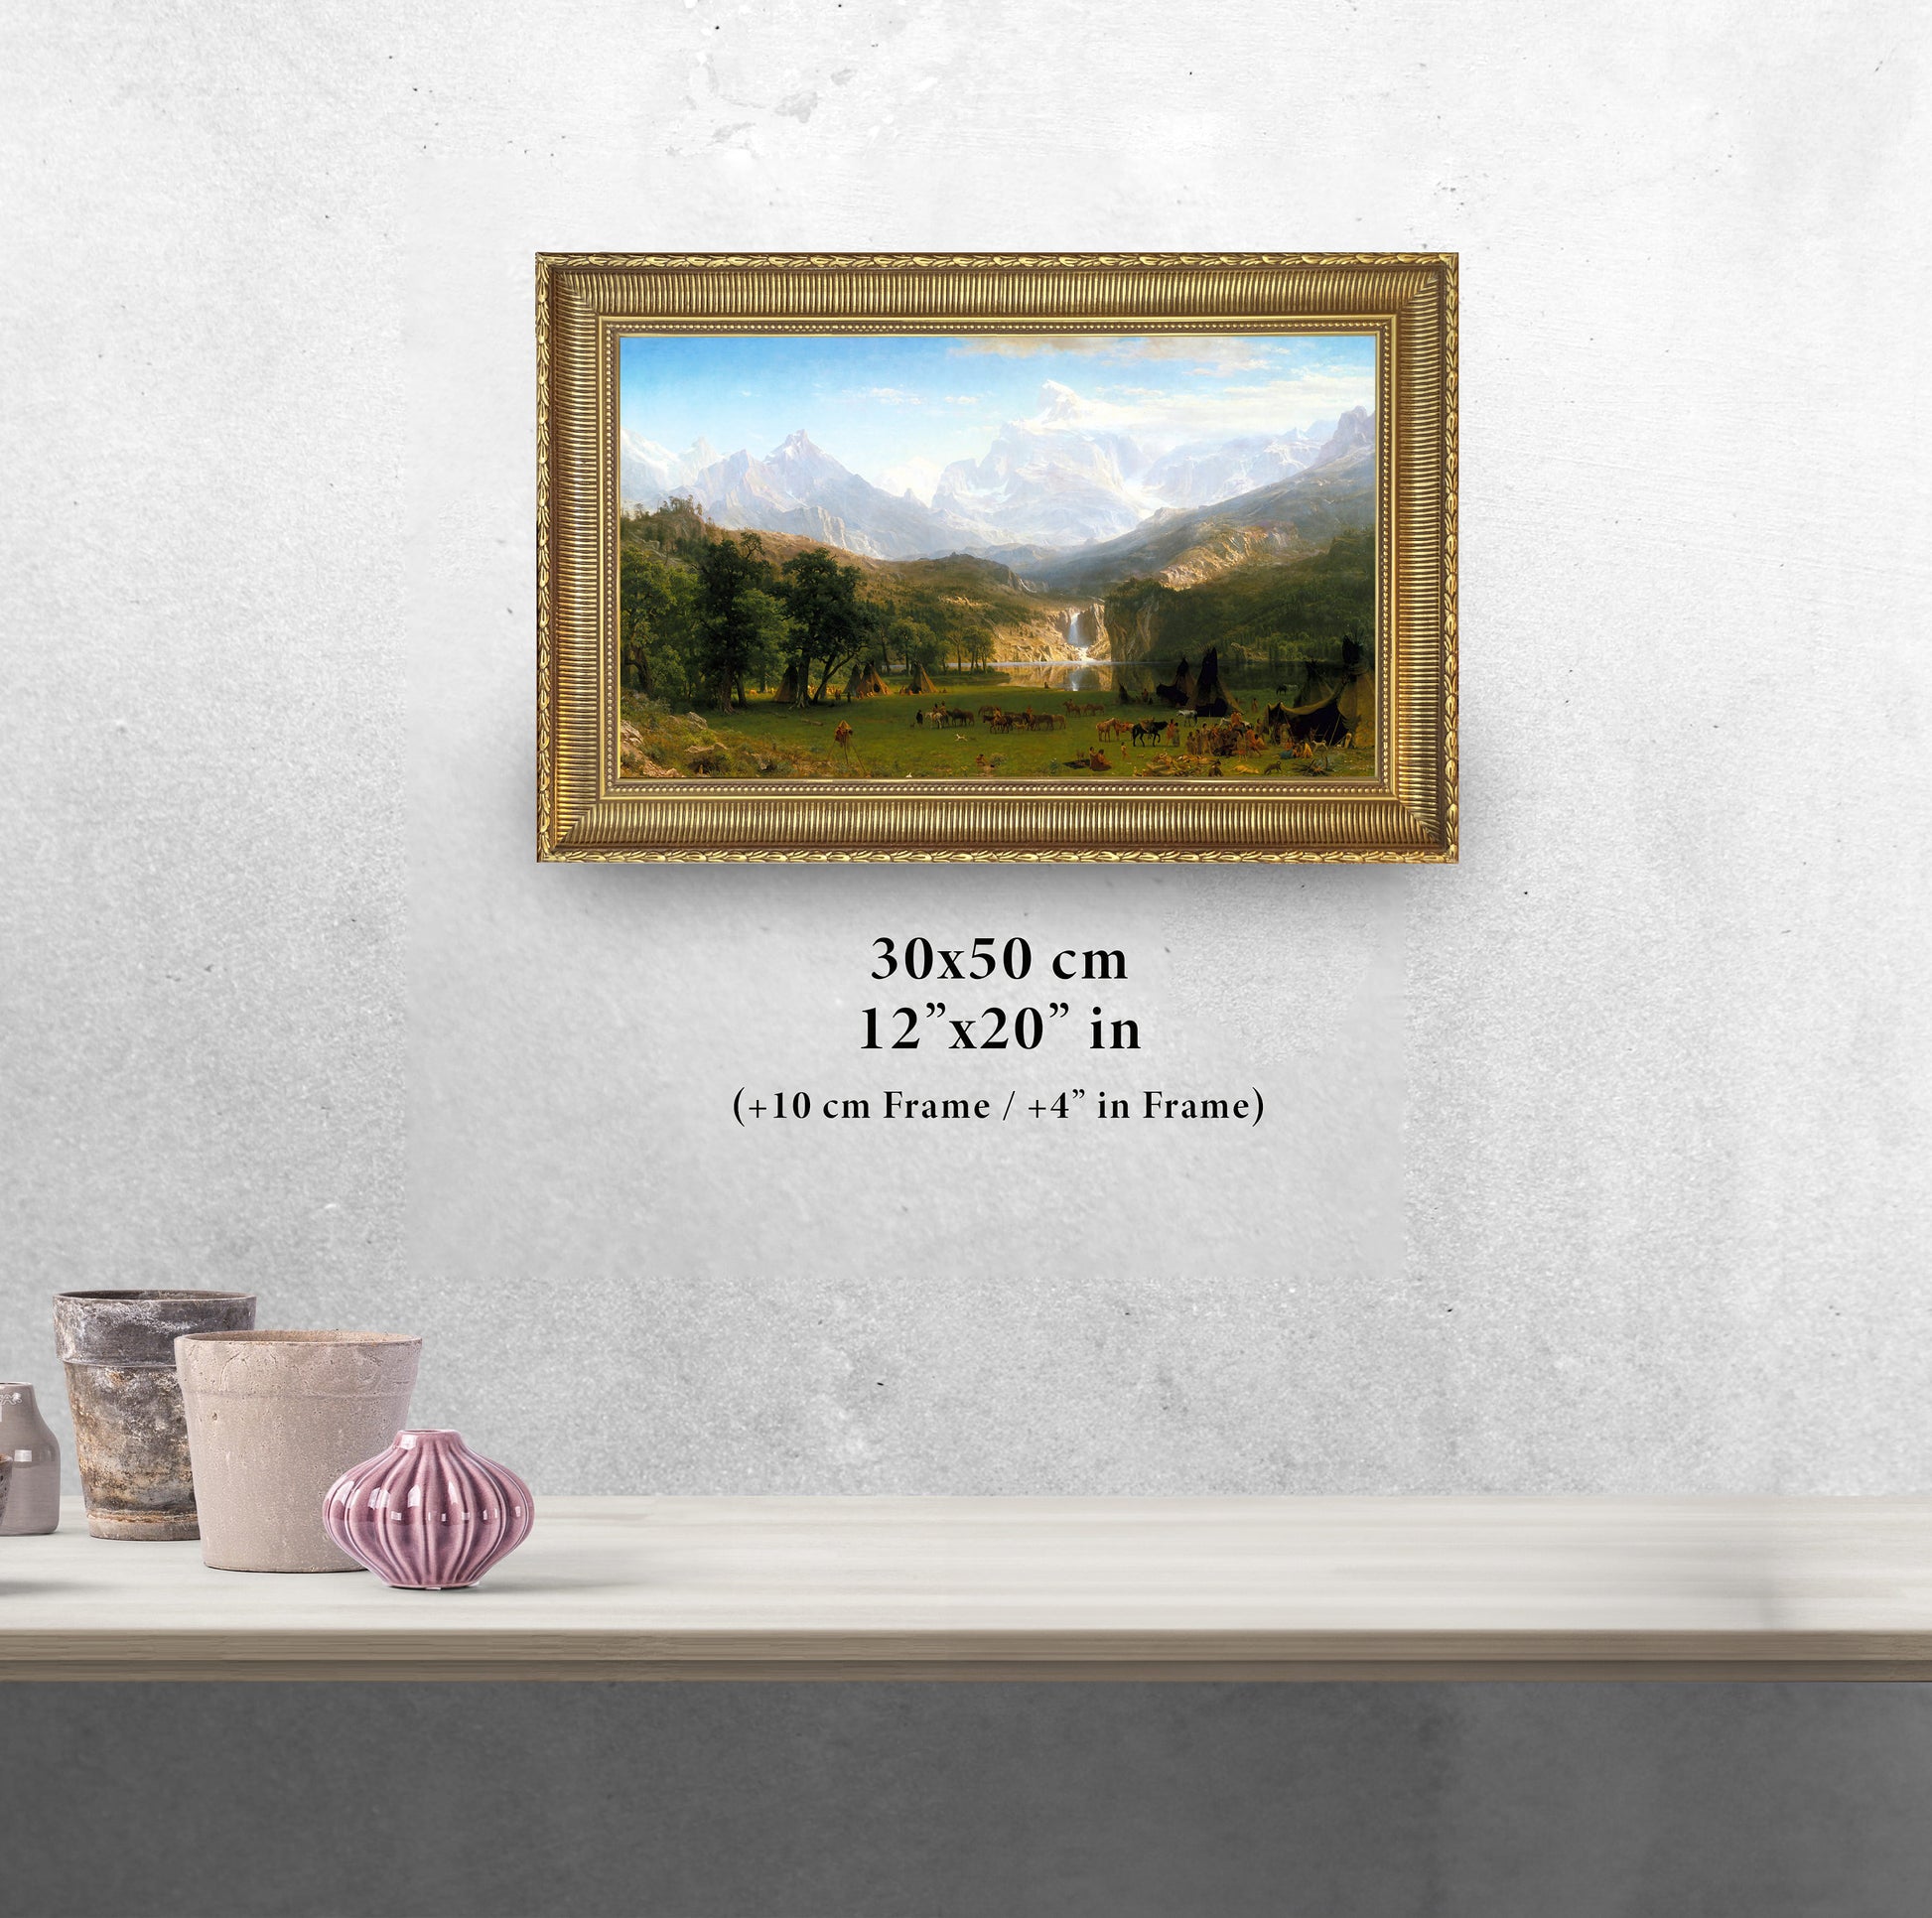 Rocky Mountains by Albert Bierstadt, 3d Printed with texture and brush strokes looks like original oil-painting, code:002